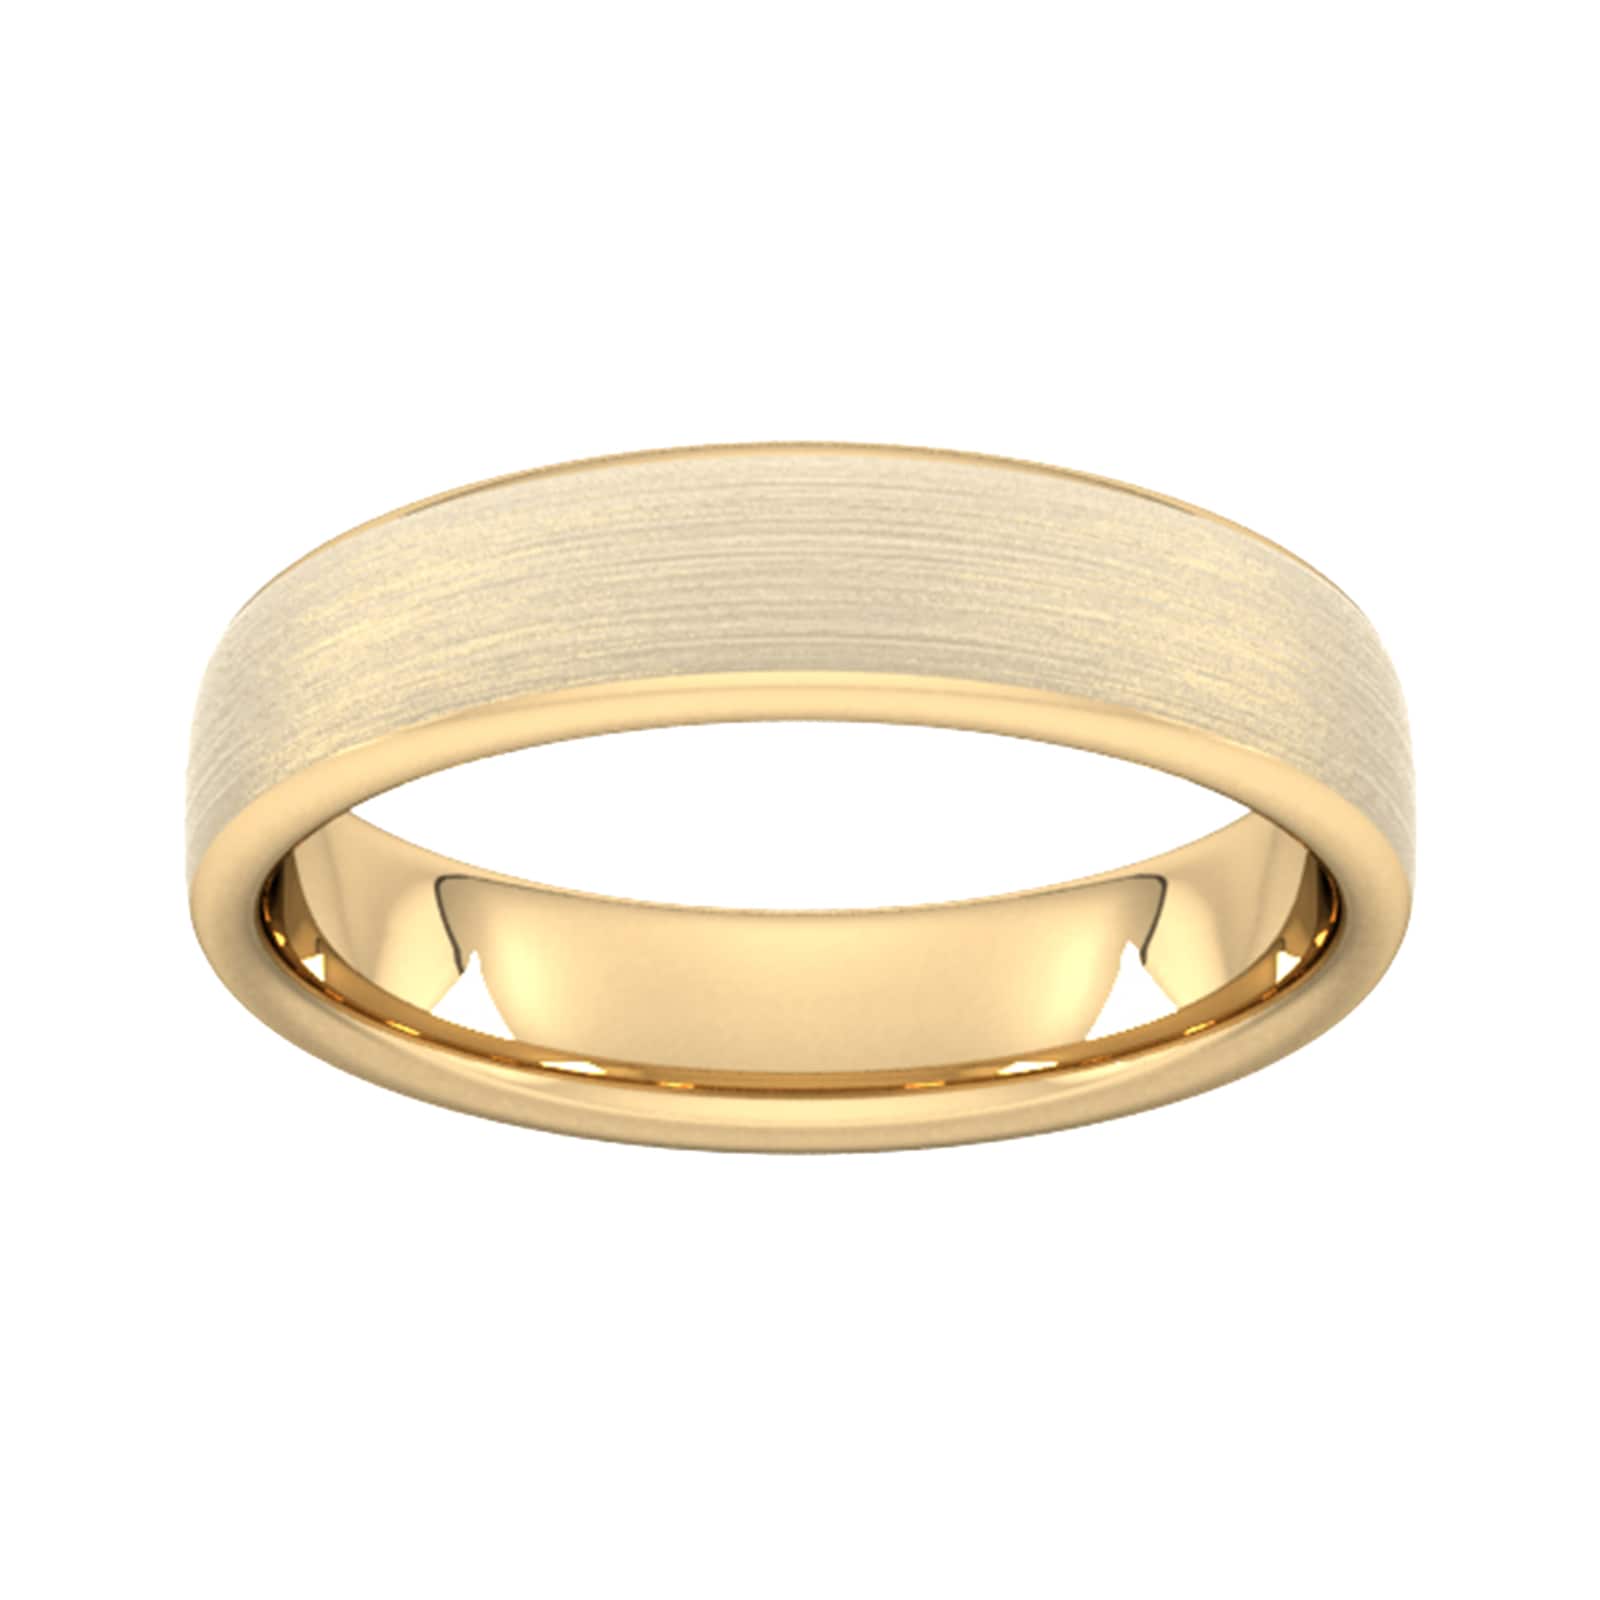 5mm Traditional Court Standard Matt Finished Wedding Ring In 9 Carat Yellow Gold - Ring Size U